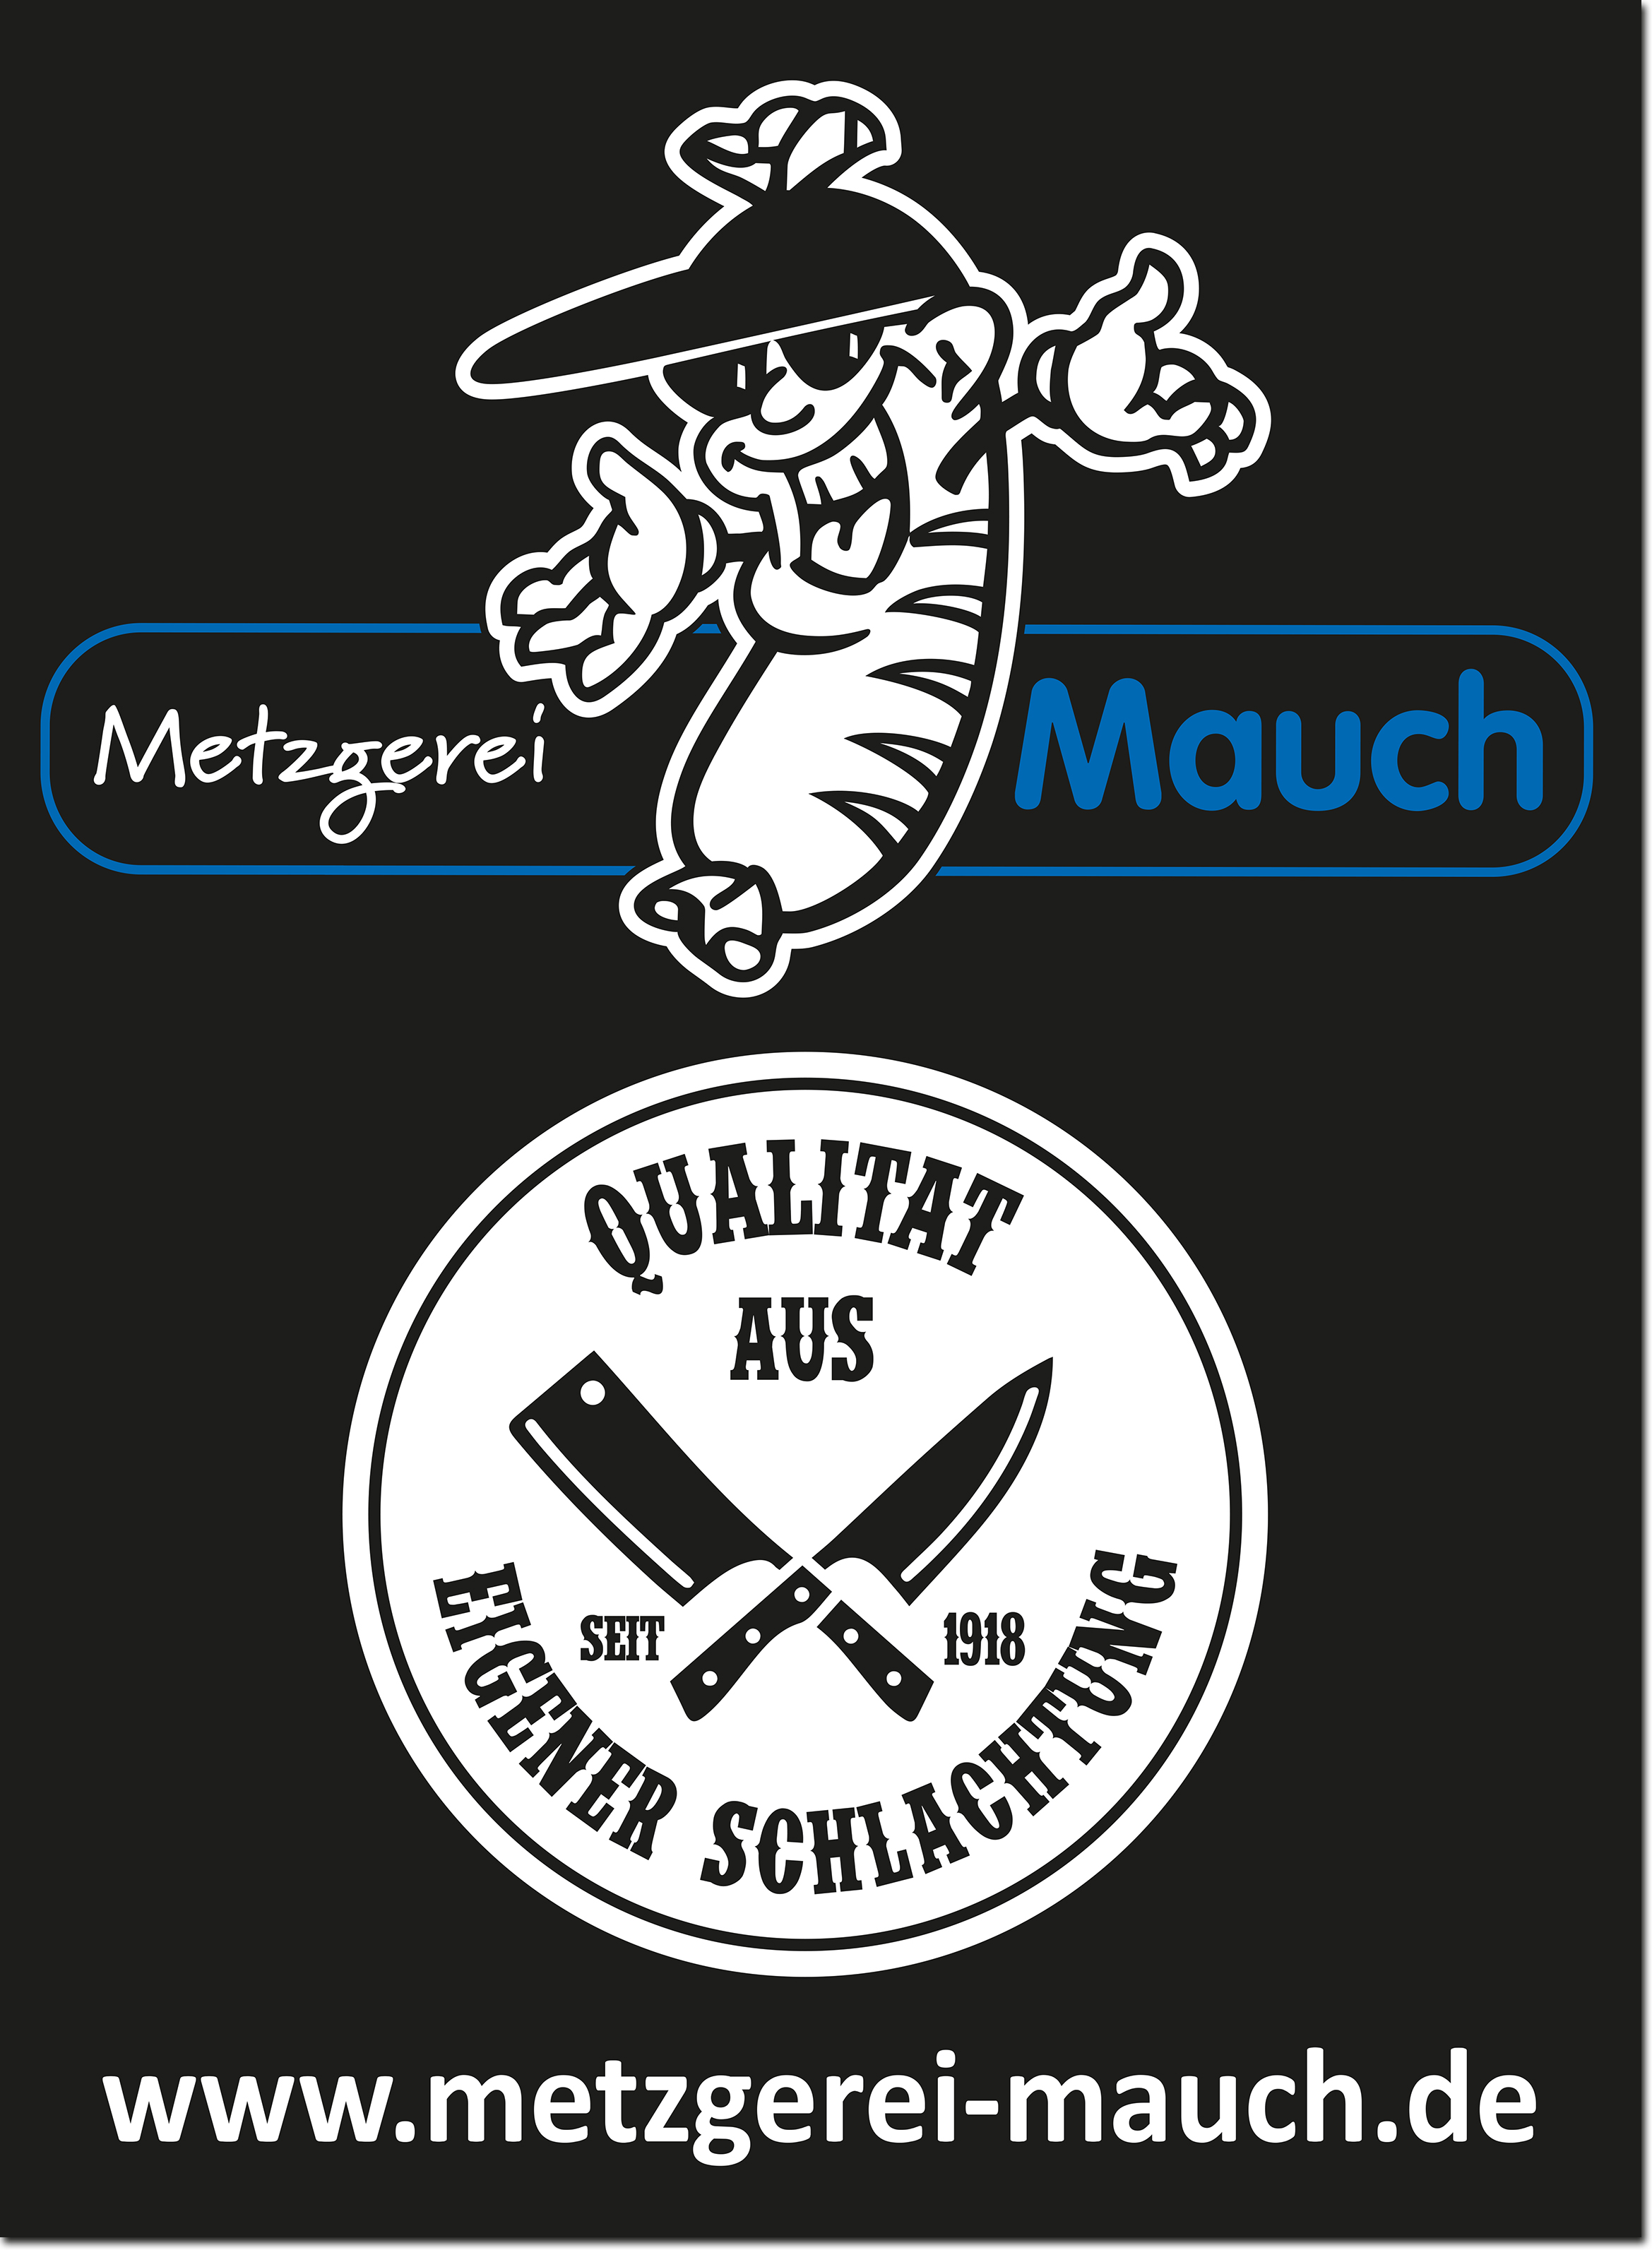 Metzgerei Mauch